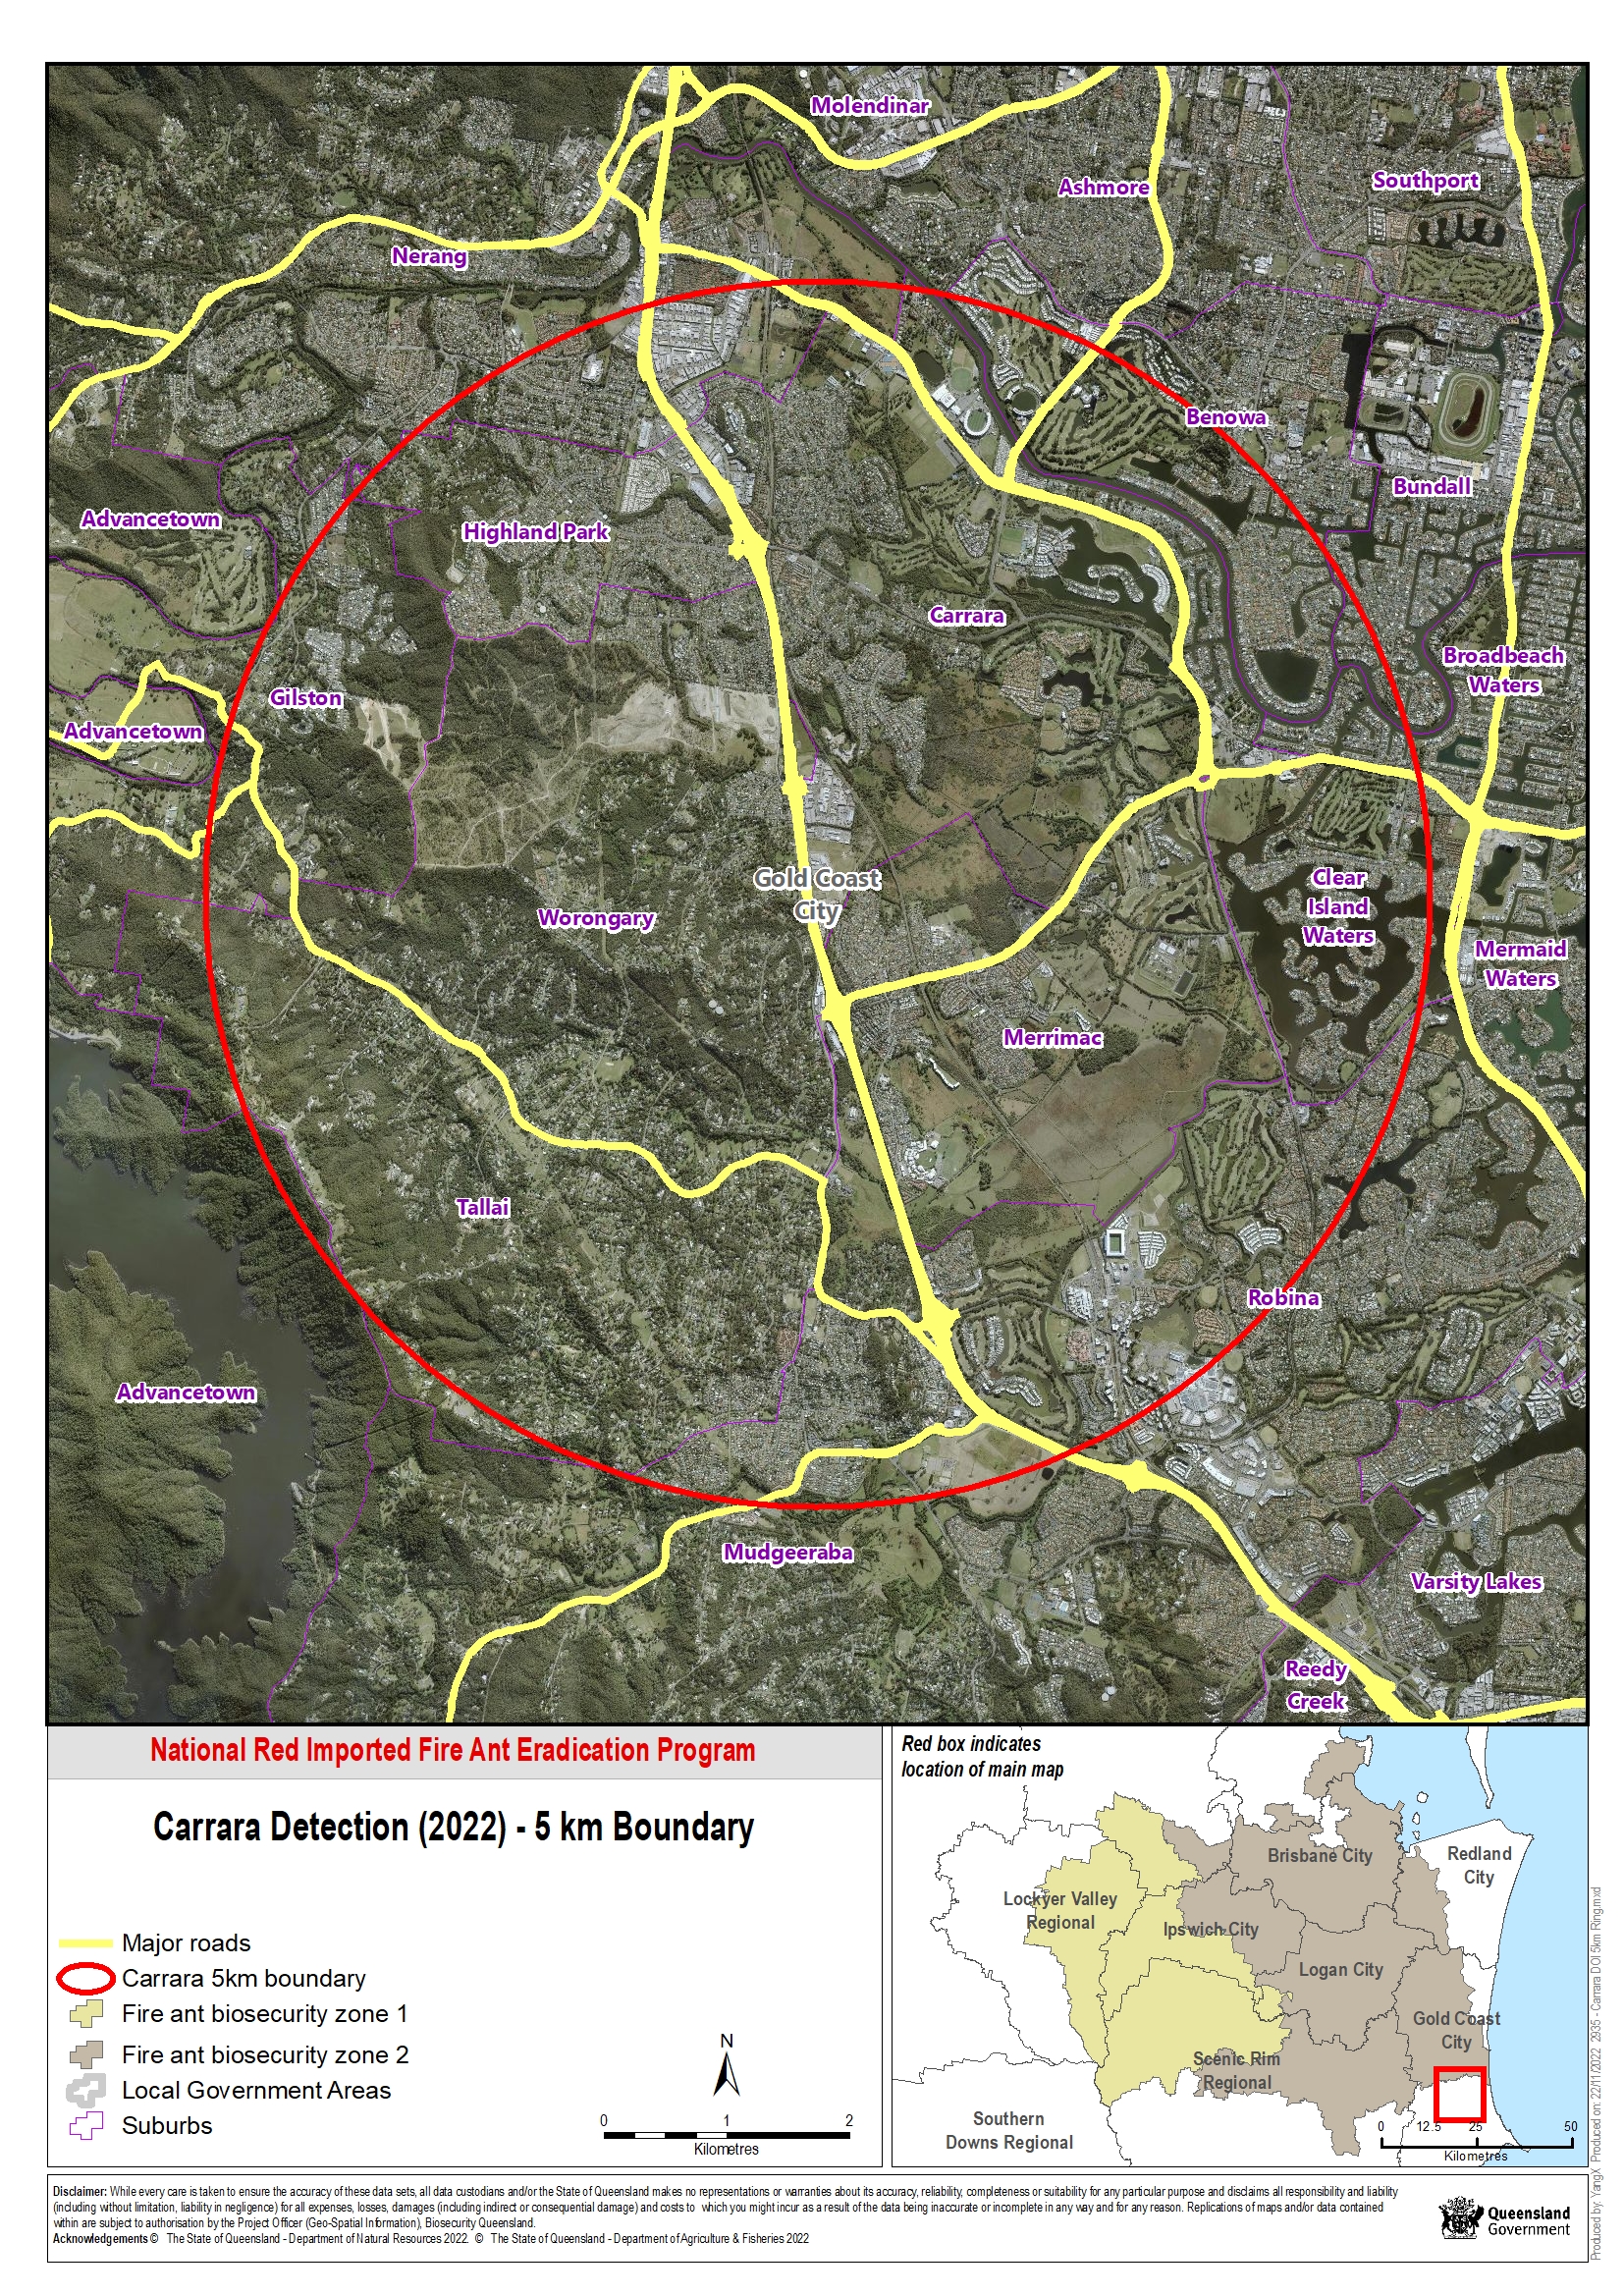 Significant detection map of fire ants found at Carrara